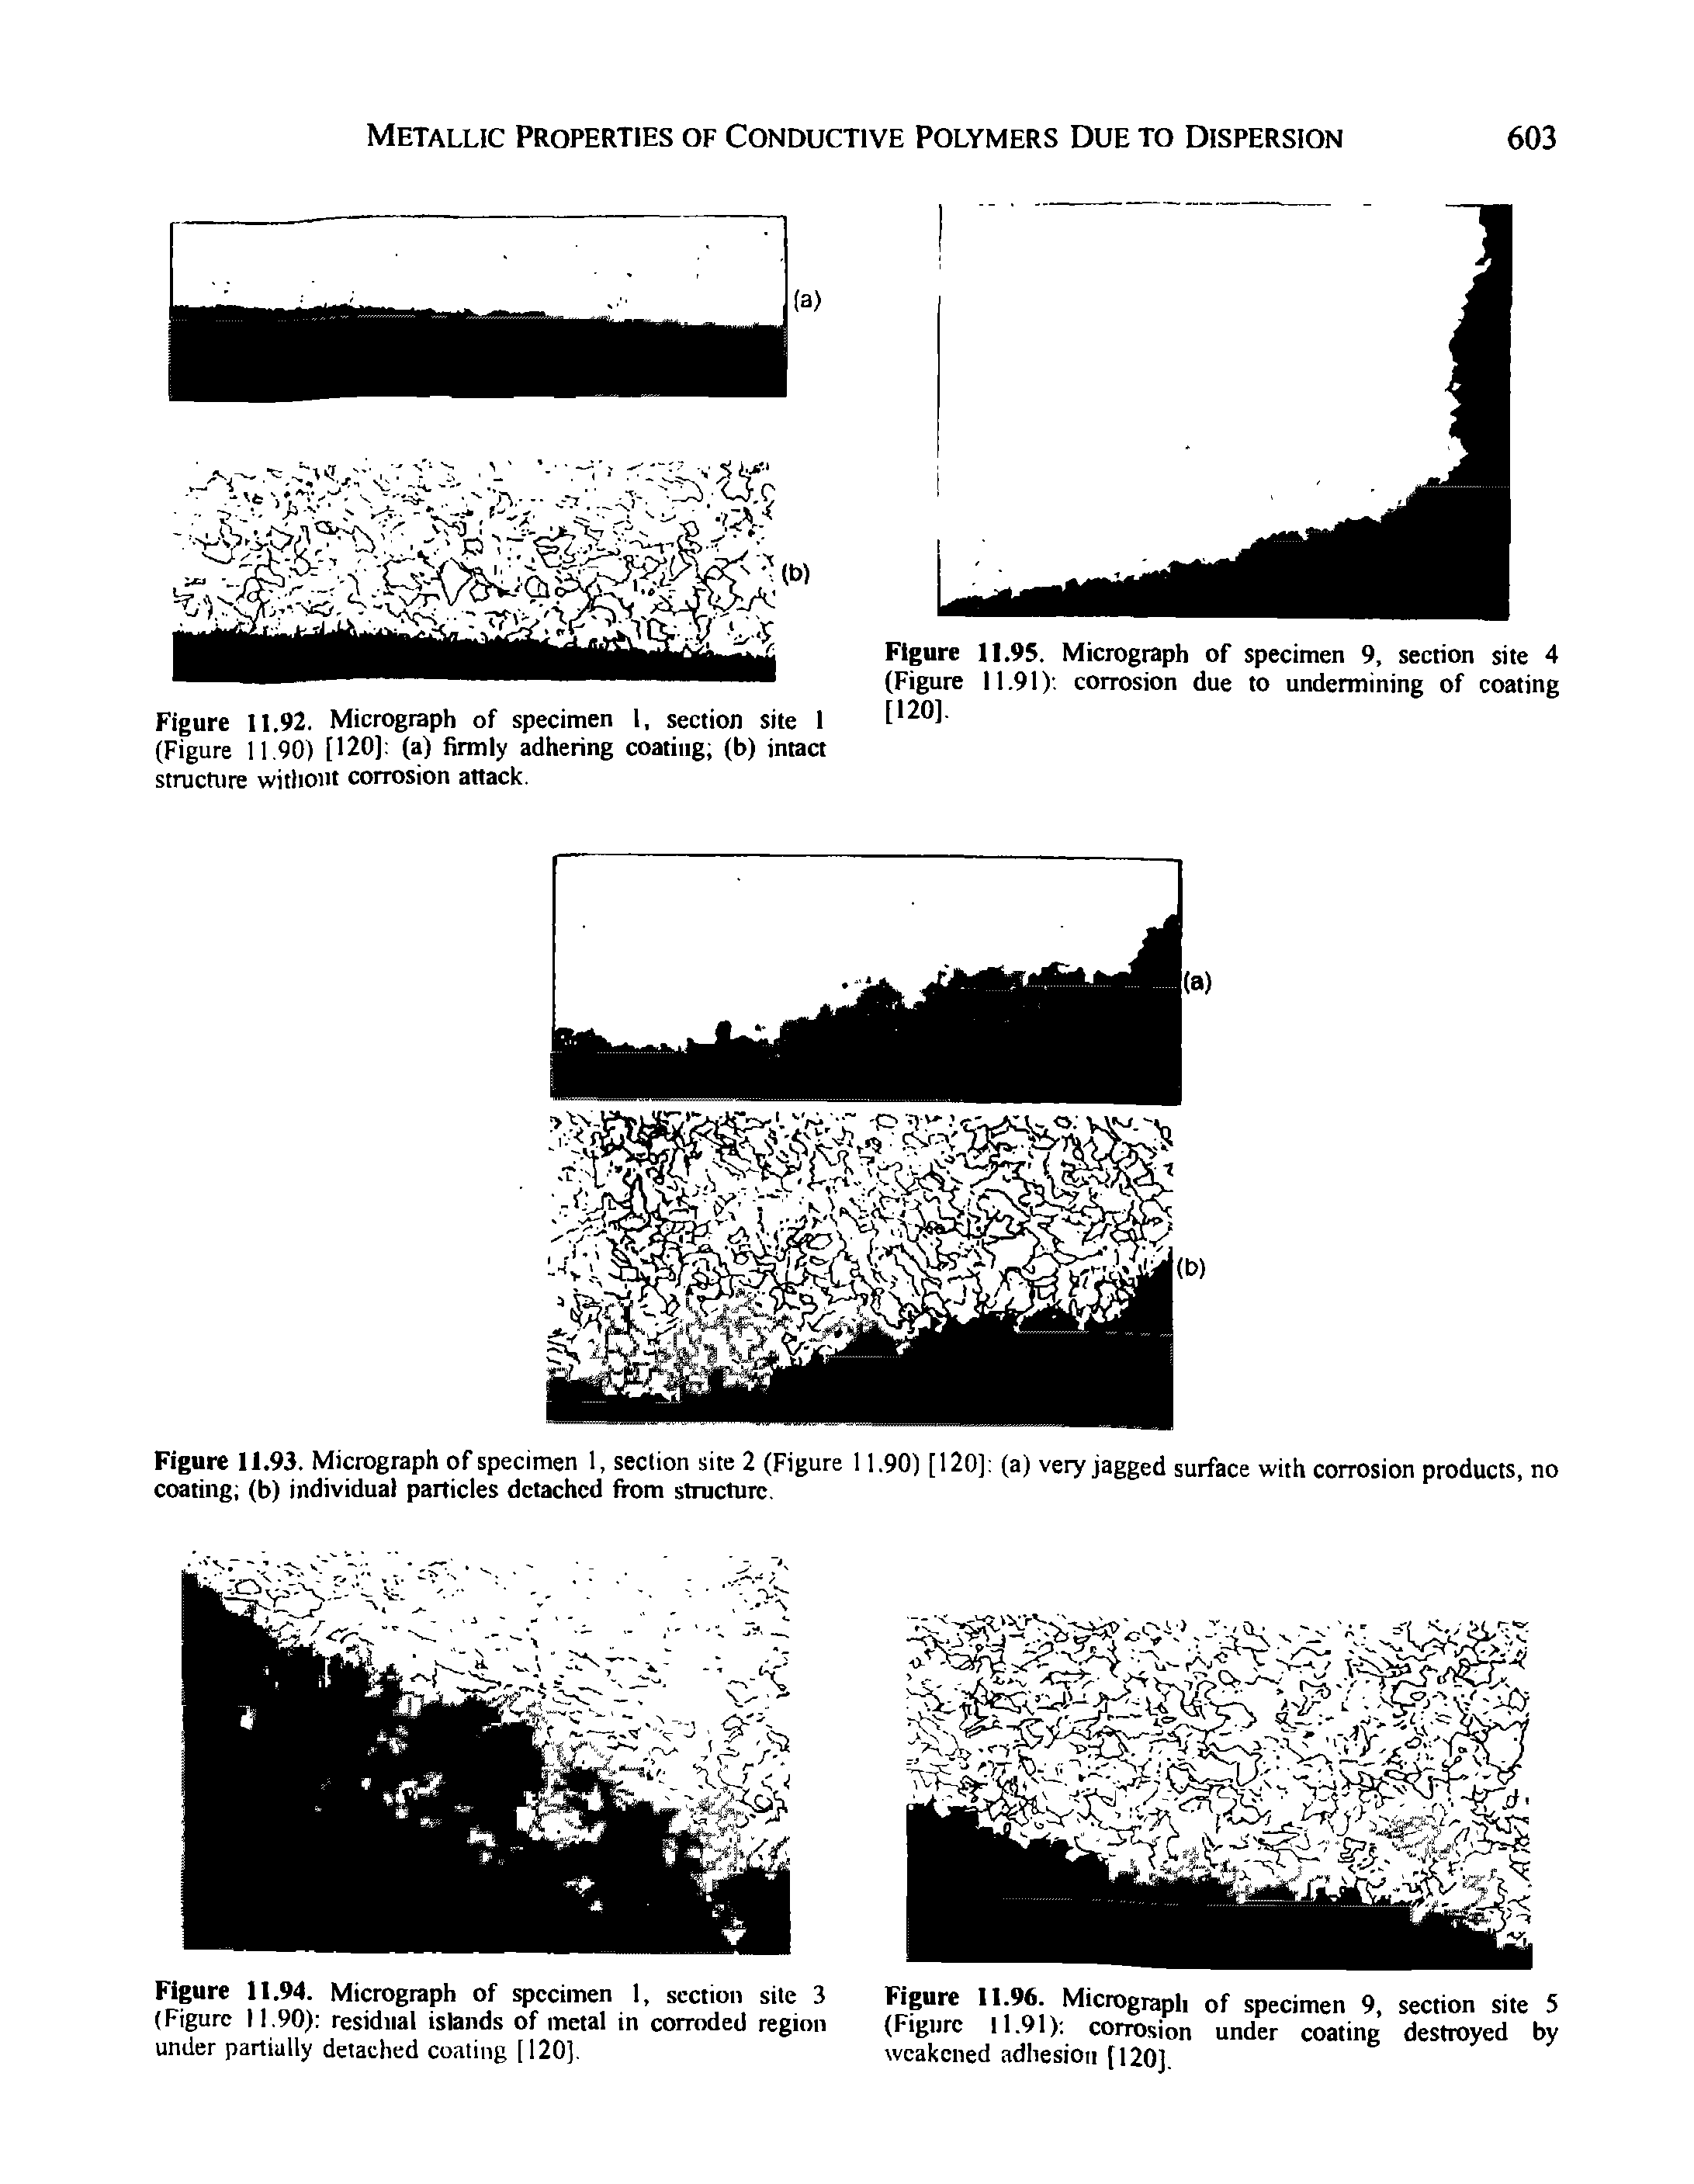 Figure 11.96. Micrograph of specimen 9, section site 5 (Figure 11.91) corrosion under coating destroyed by weakened adhesion [120],...